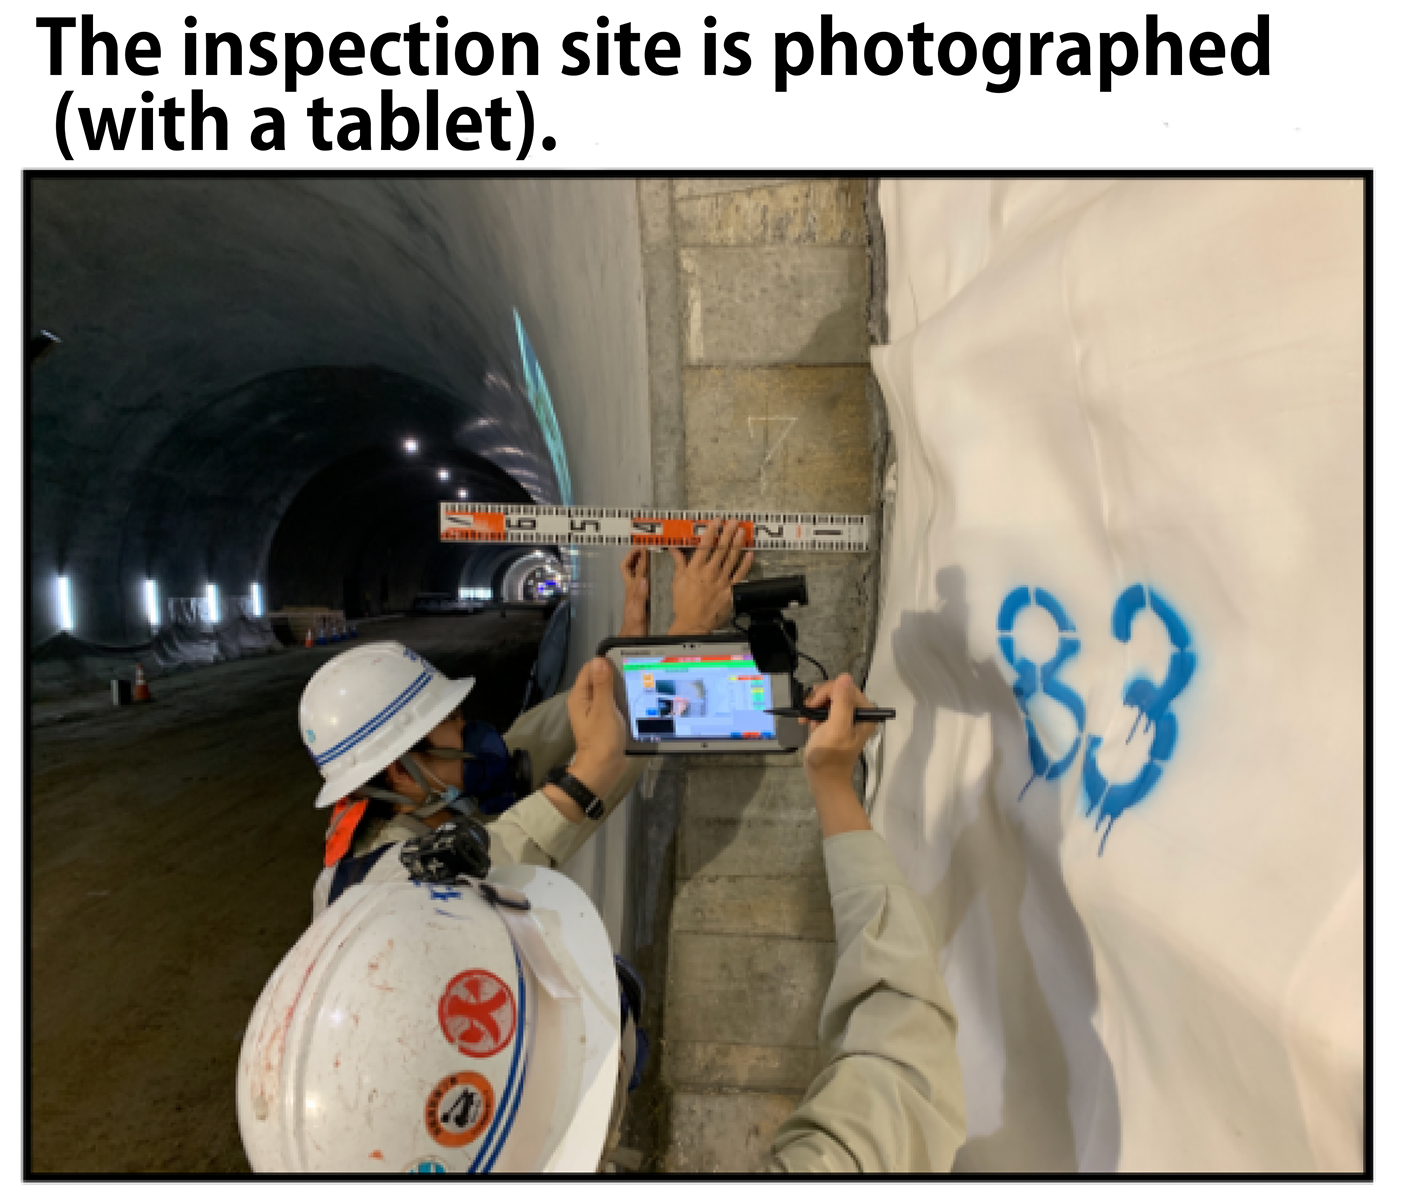 The inspection spot is photographed (with a tablet)